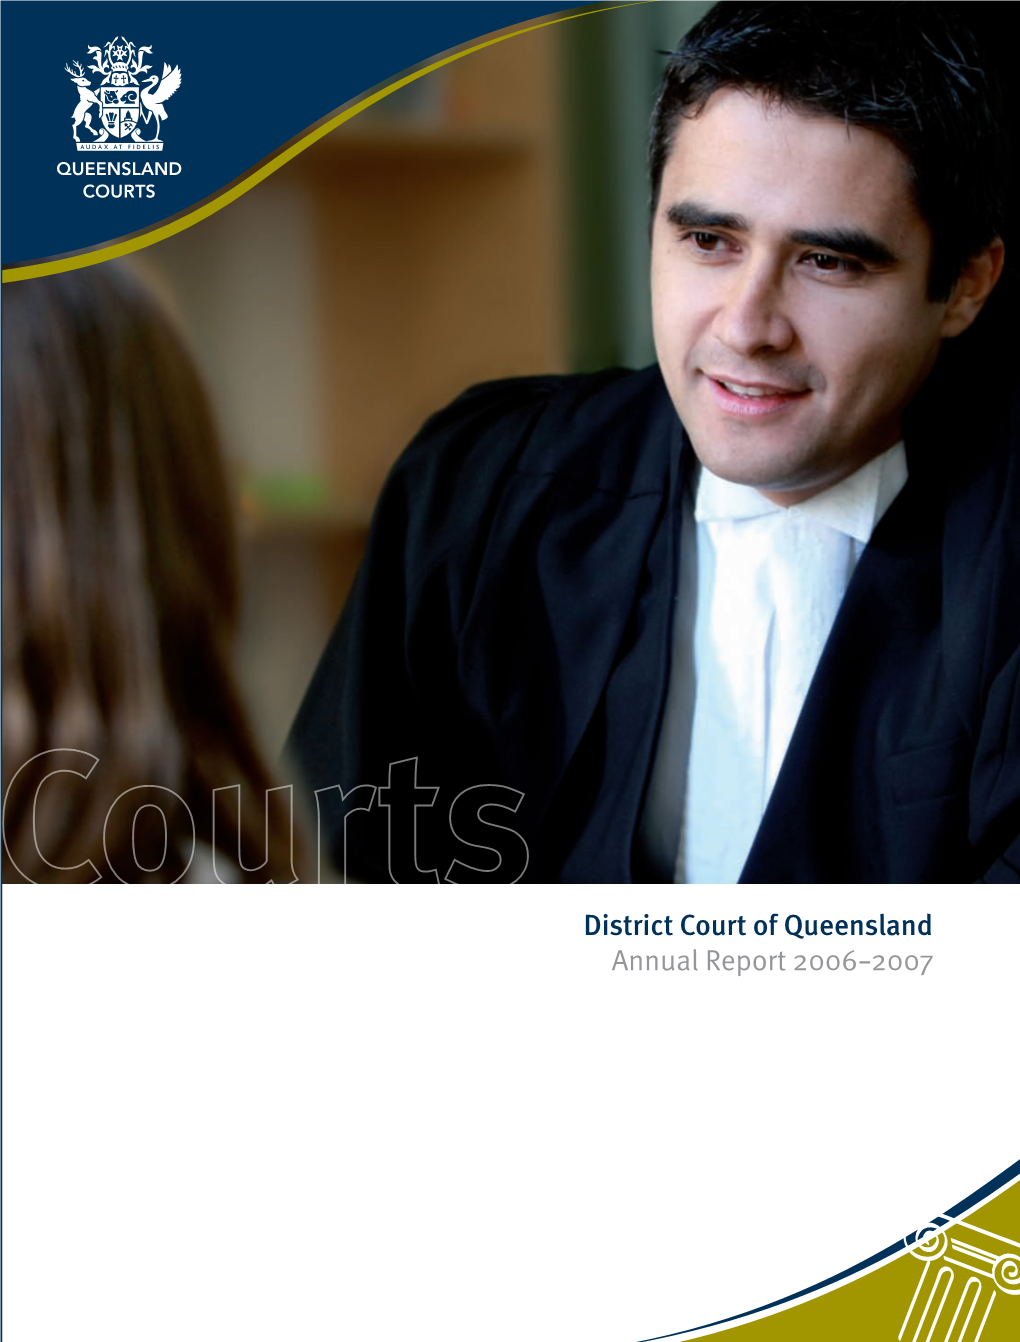 District Court of Queensland Annual Report